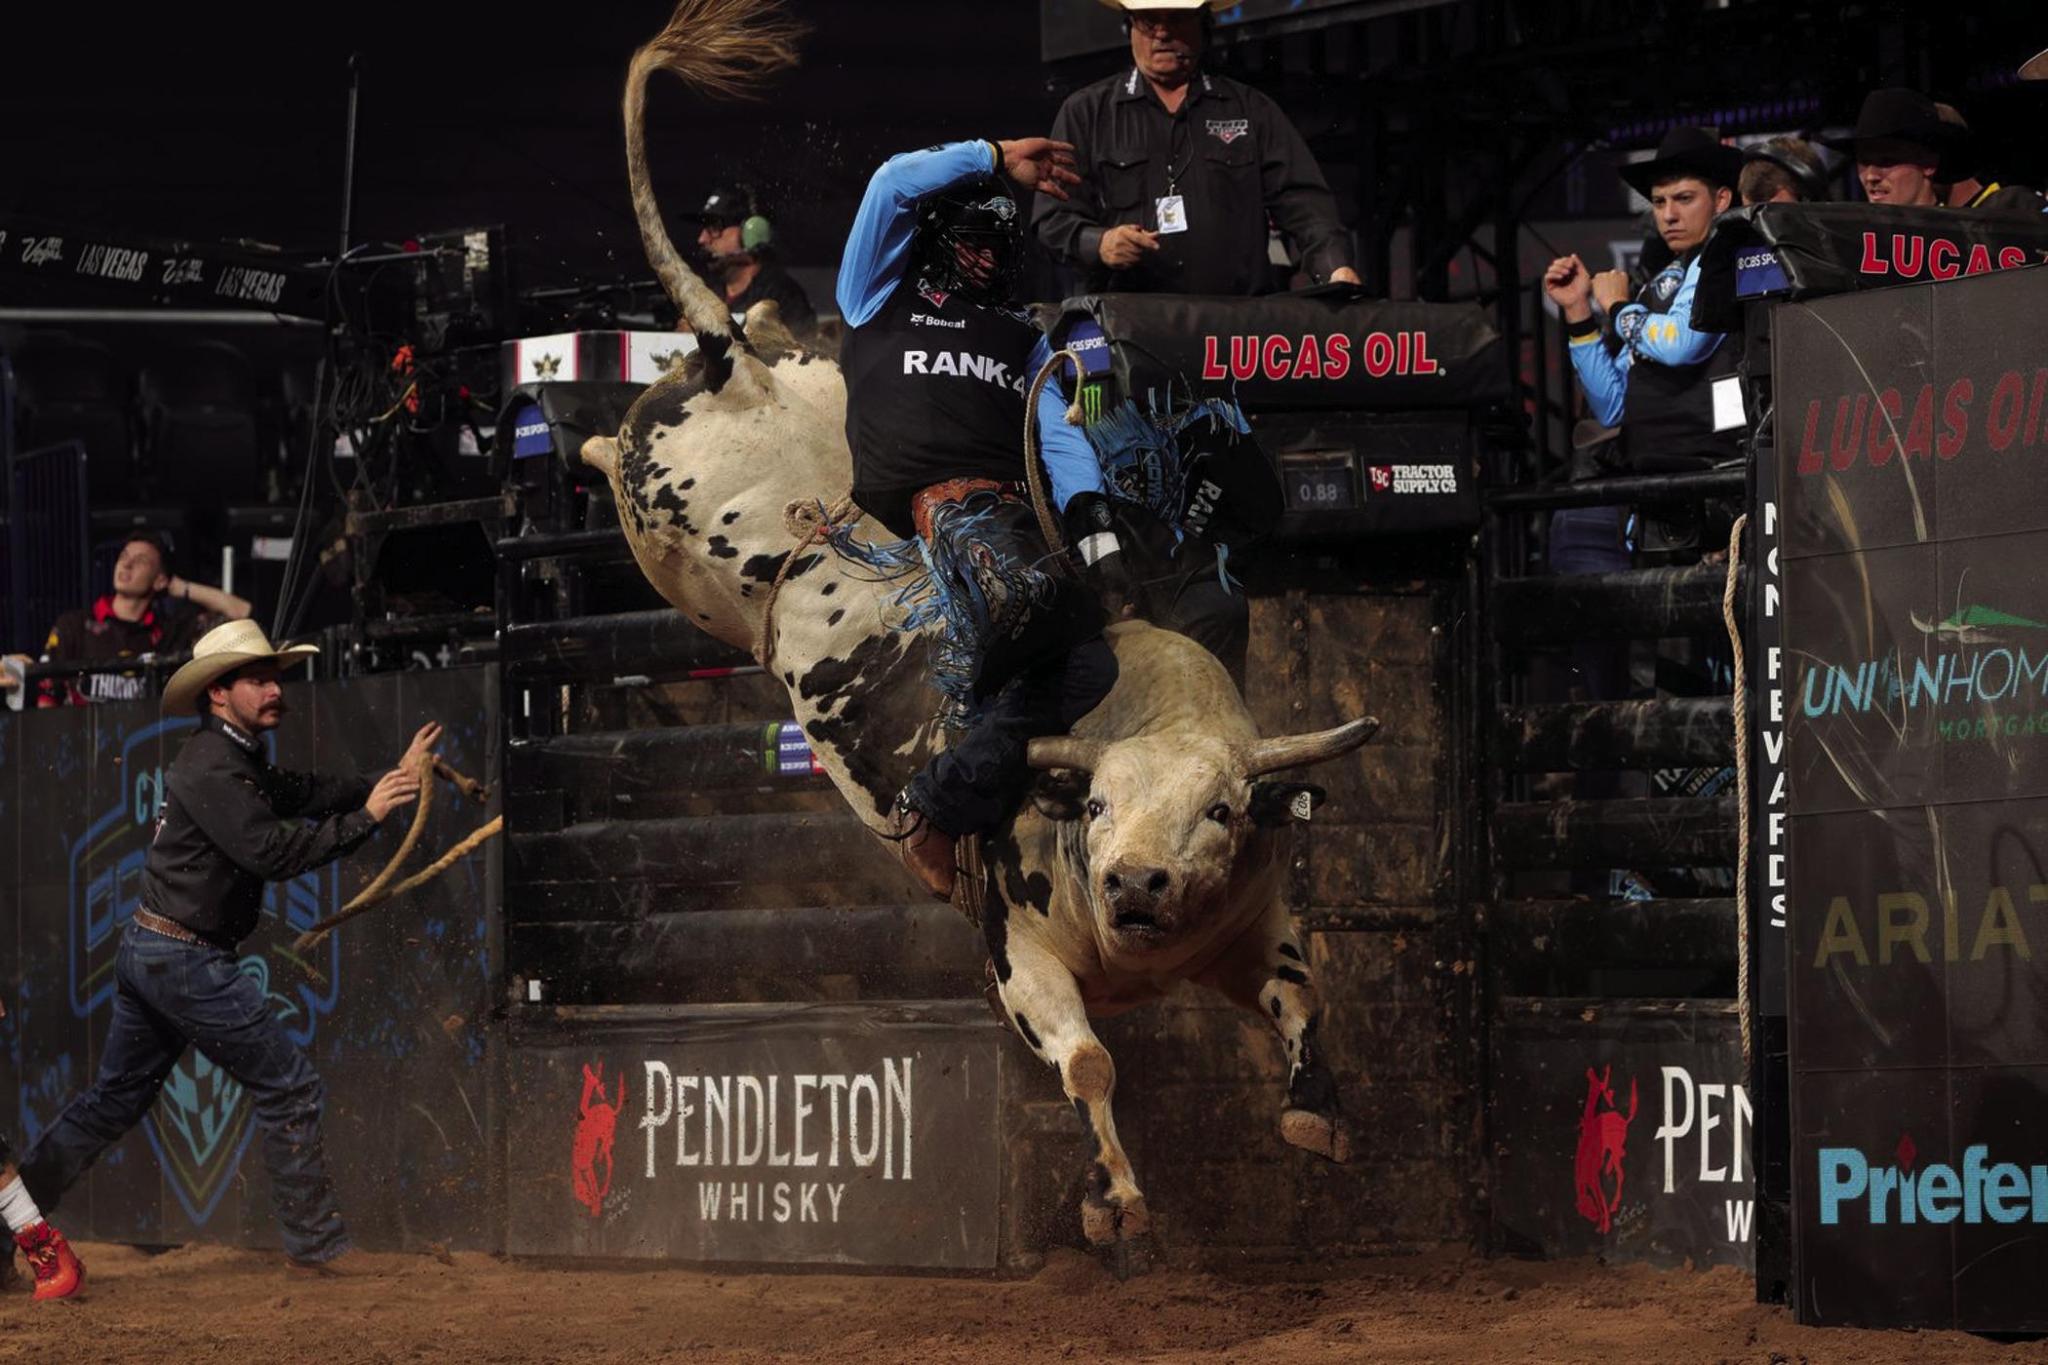 Oklahoma Freedom become first team to win Inaugural PBR Team Series ...